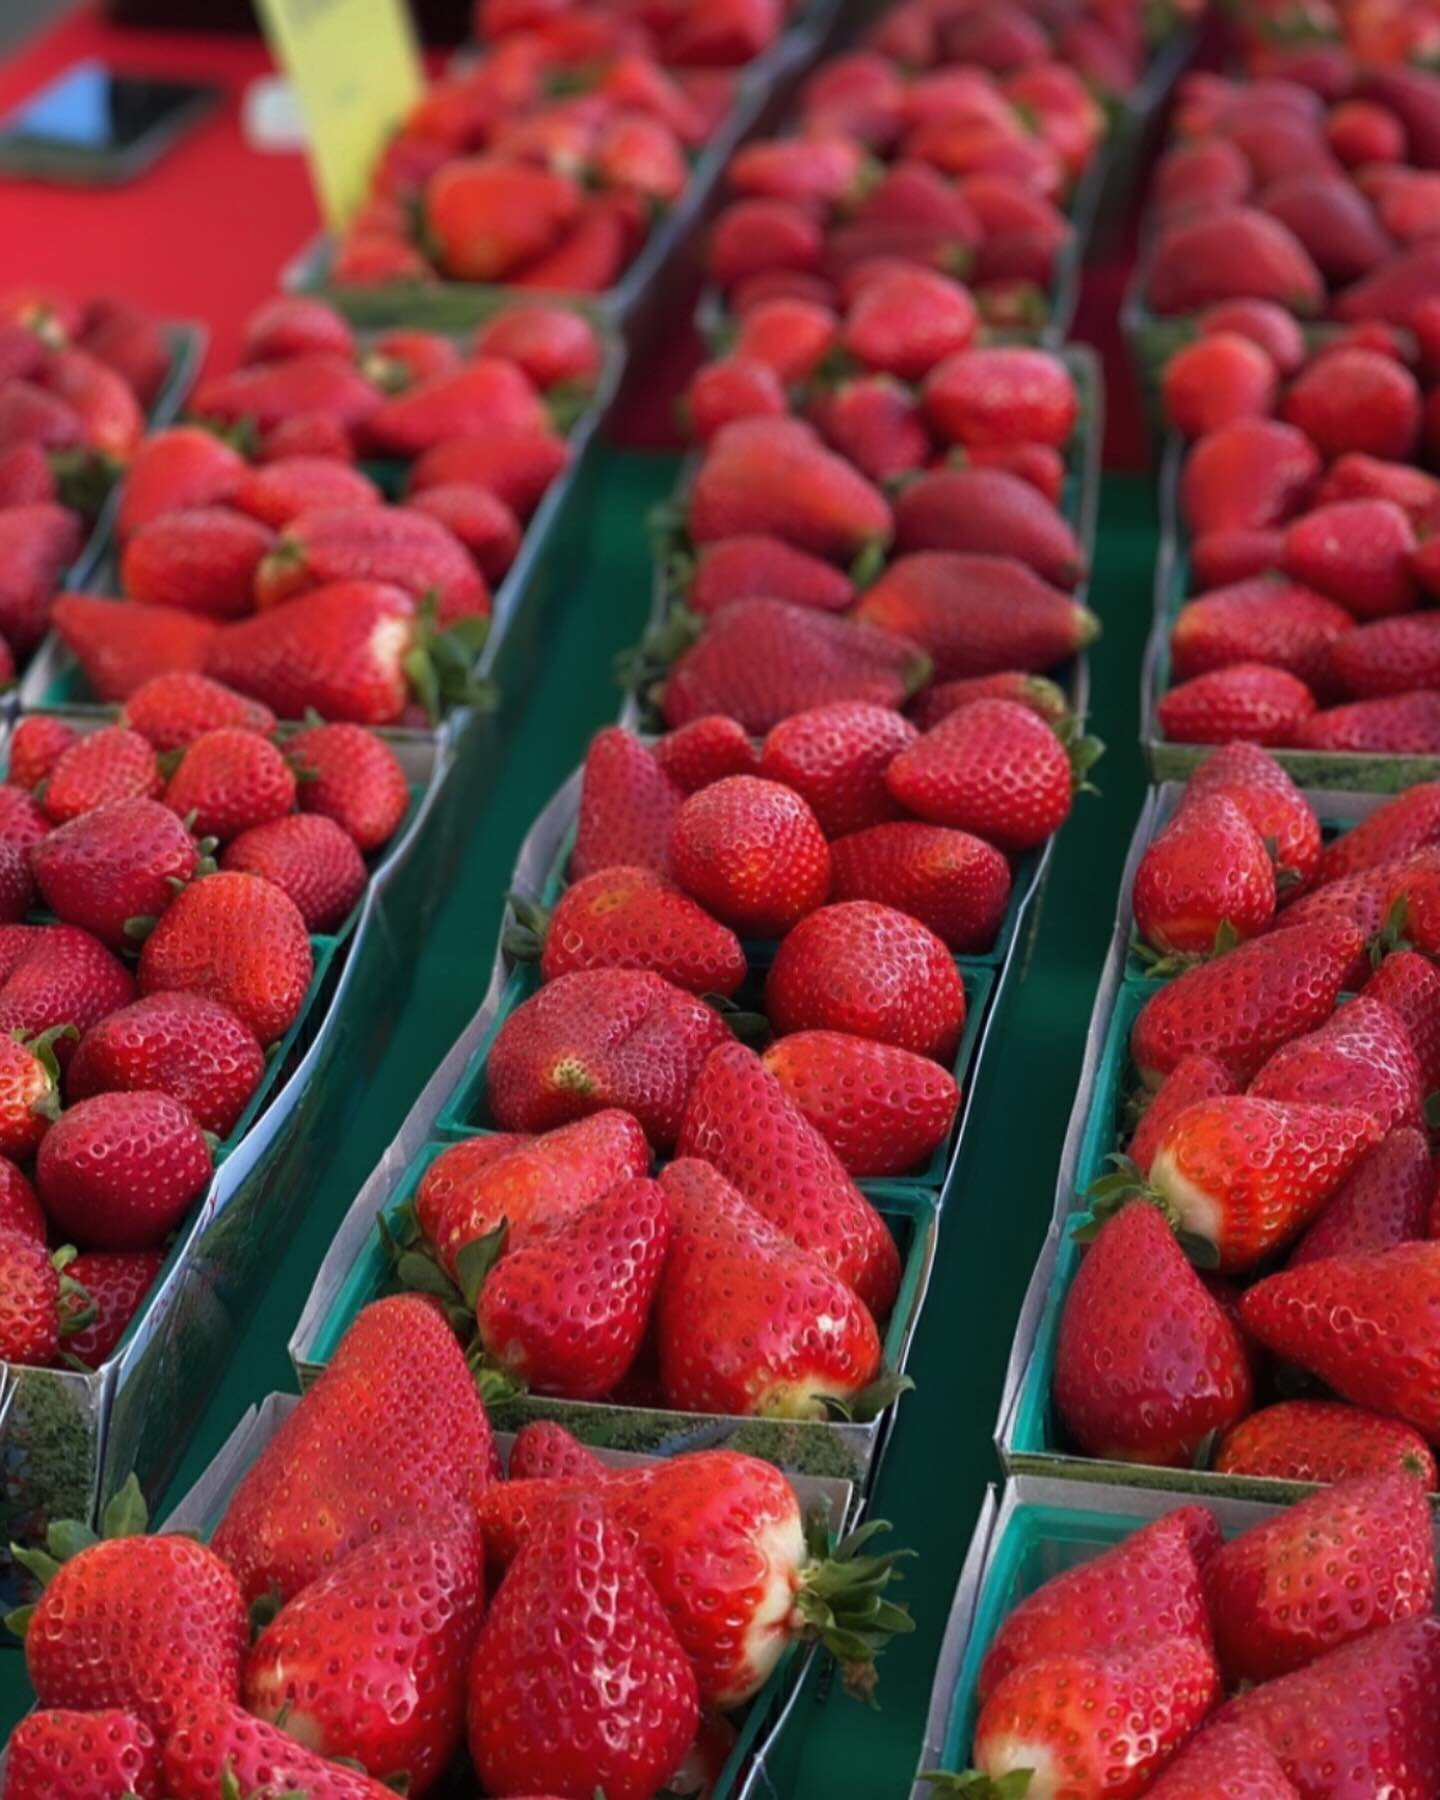 See you there! Join us opening night tonight at the downtown San Rafael Summer Market for an evening of vibrant community and delightful flavors. In celebration of the opening season, we are thrilled to offer FREE baskets of sweet, organic strawberri